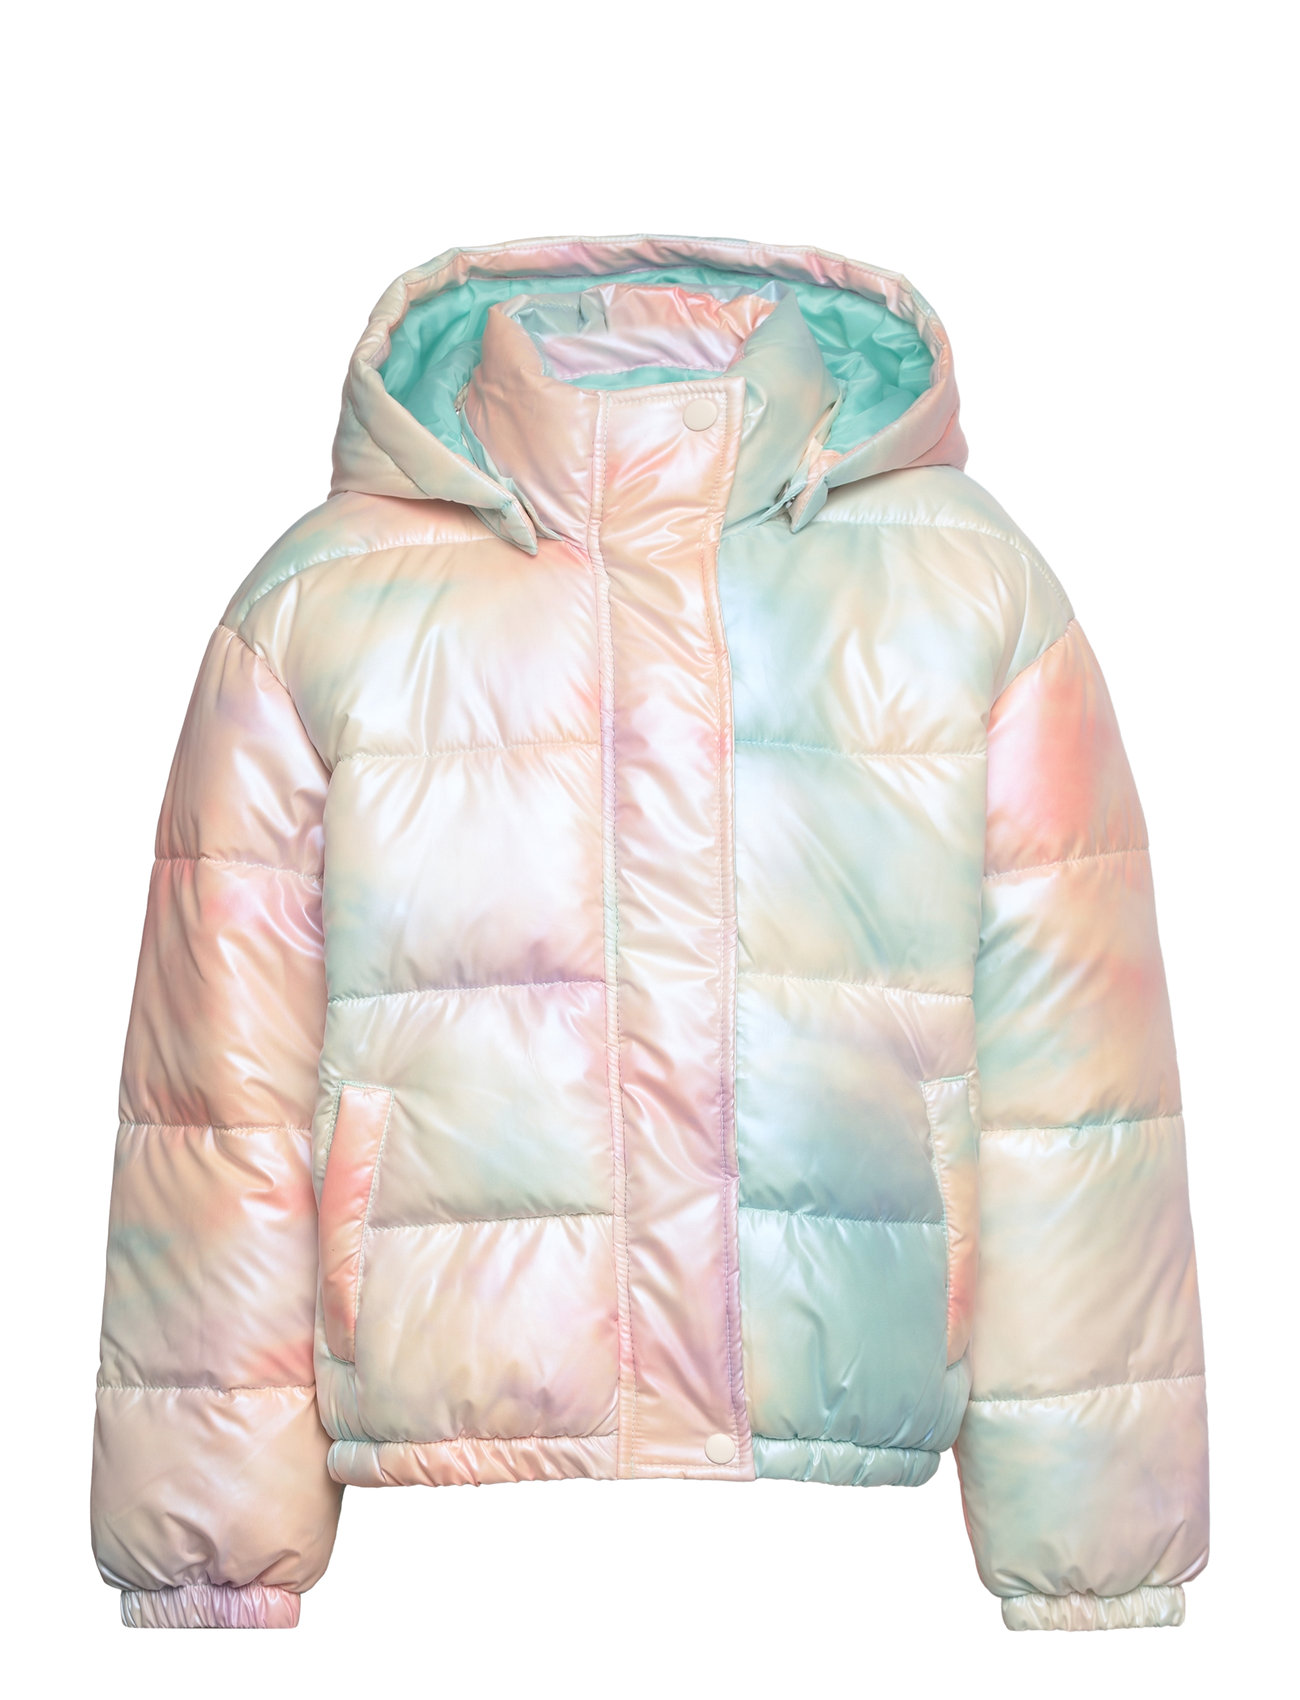 Puffer it 31.50 it and Jacket - €. from name Nkfmash Puffer returns Buy online delivery name & Padded Fast at Boozt.com. easy